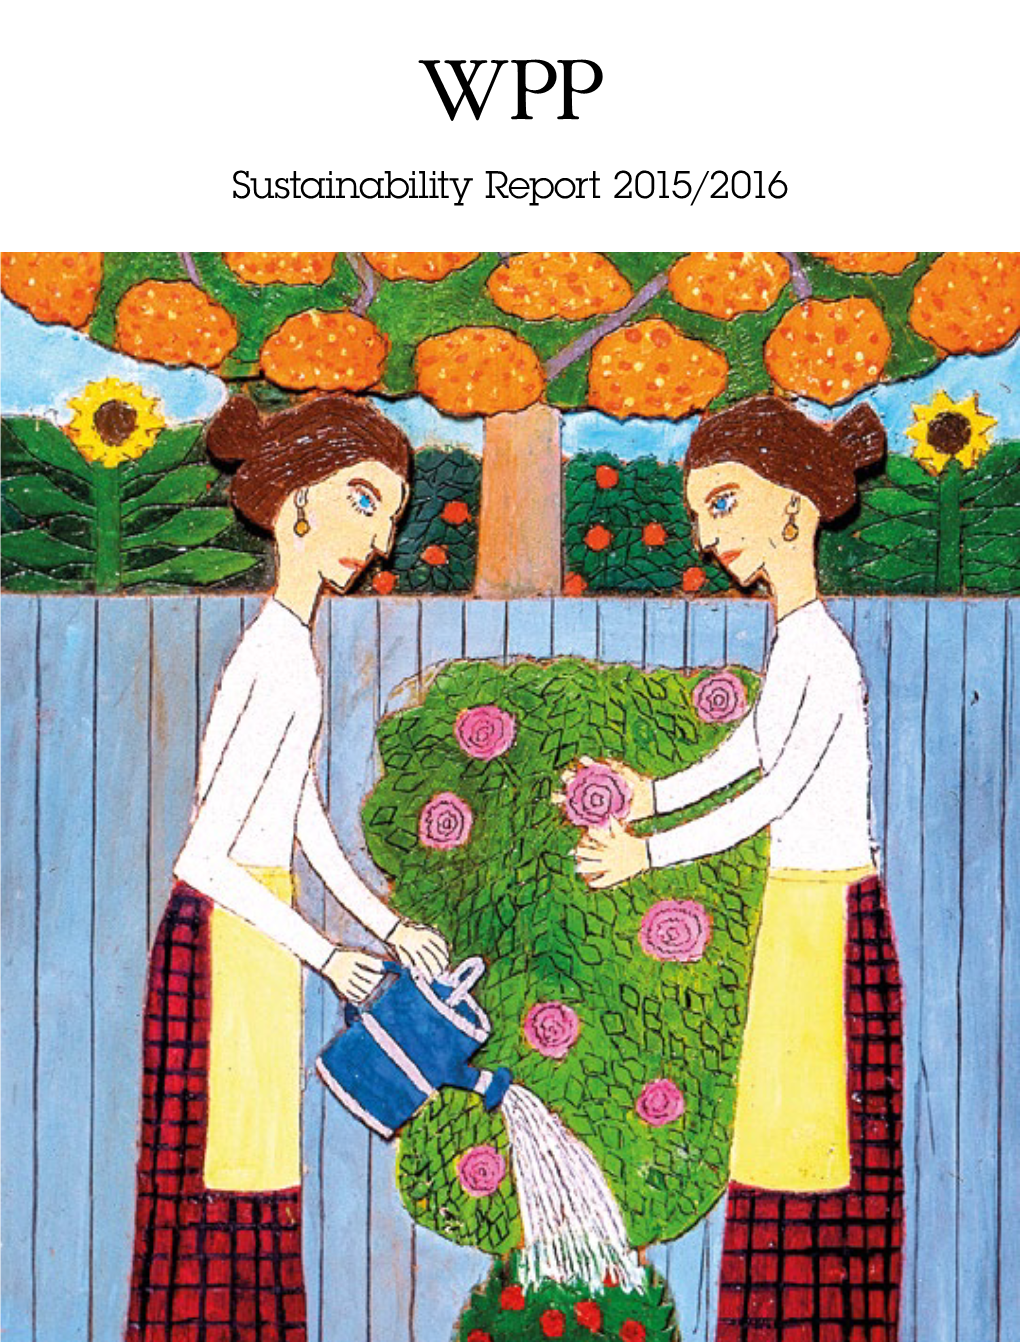 Sustainability Report 2015/2016 Sustainability Report 2015/2016 Contents